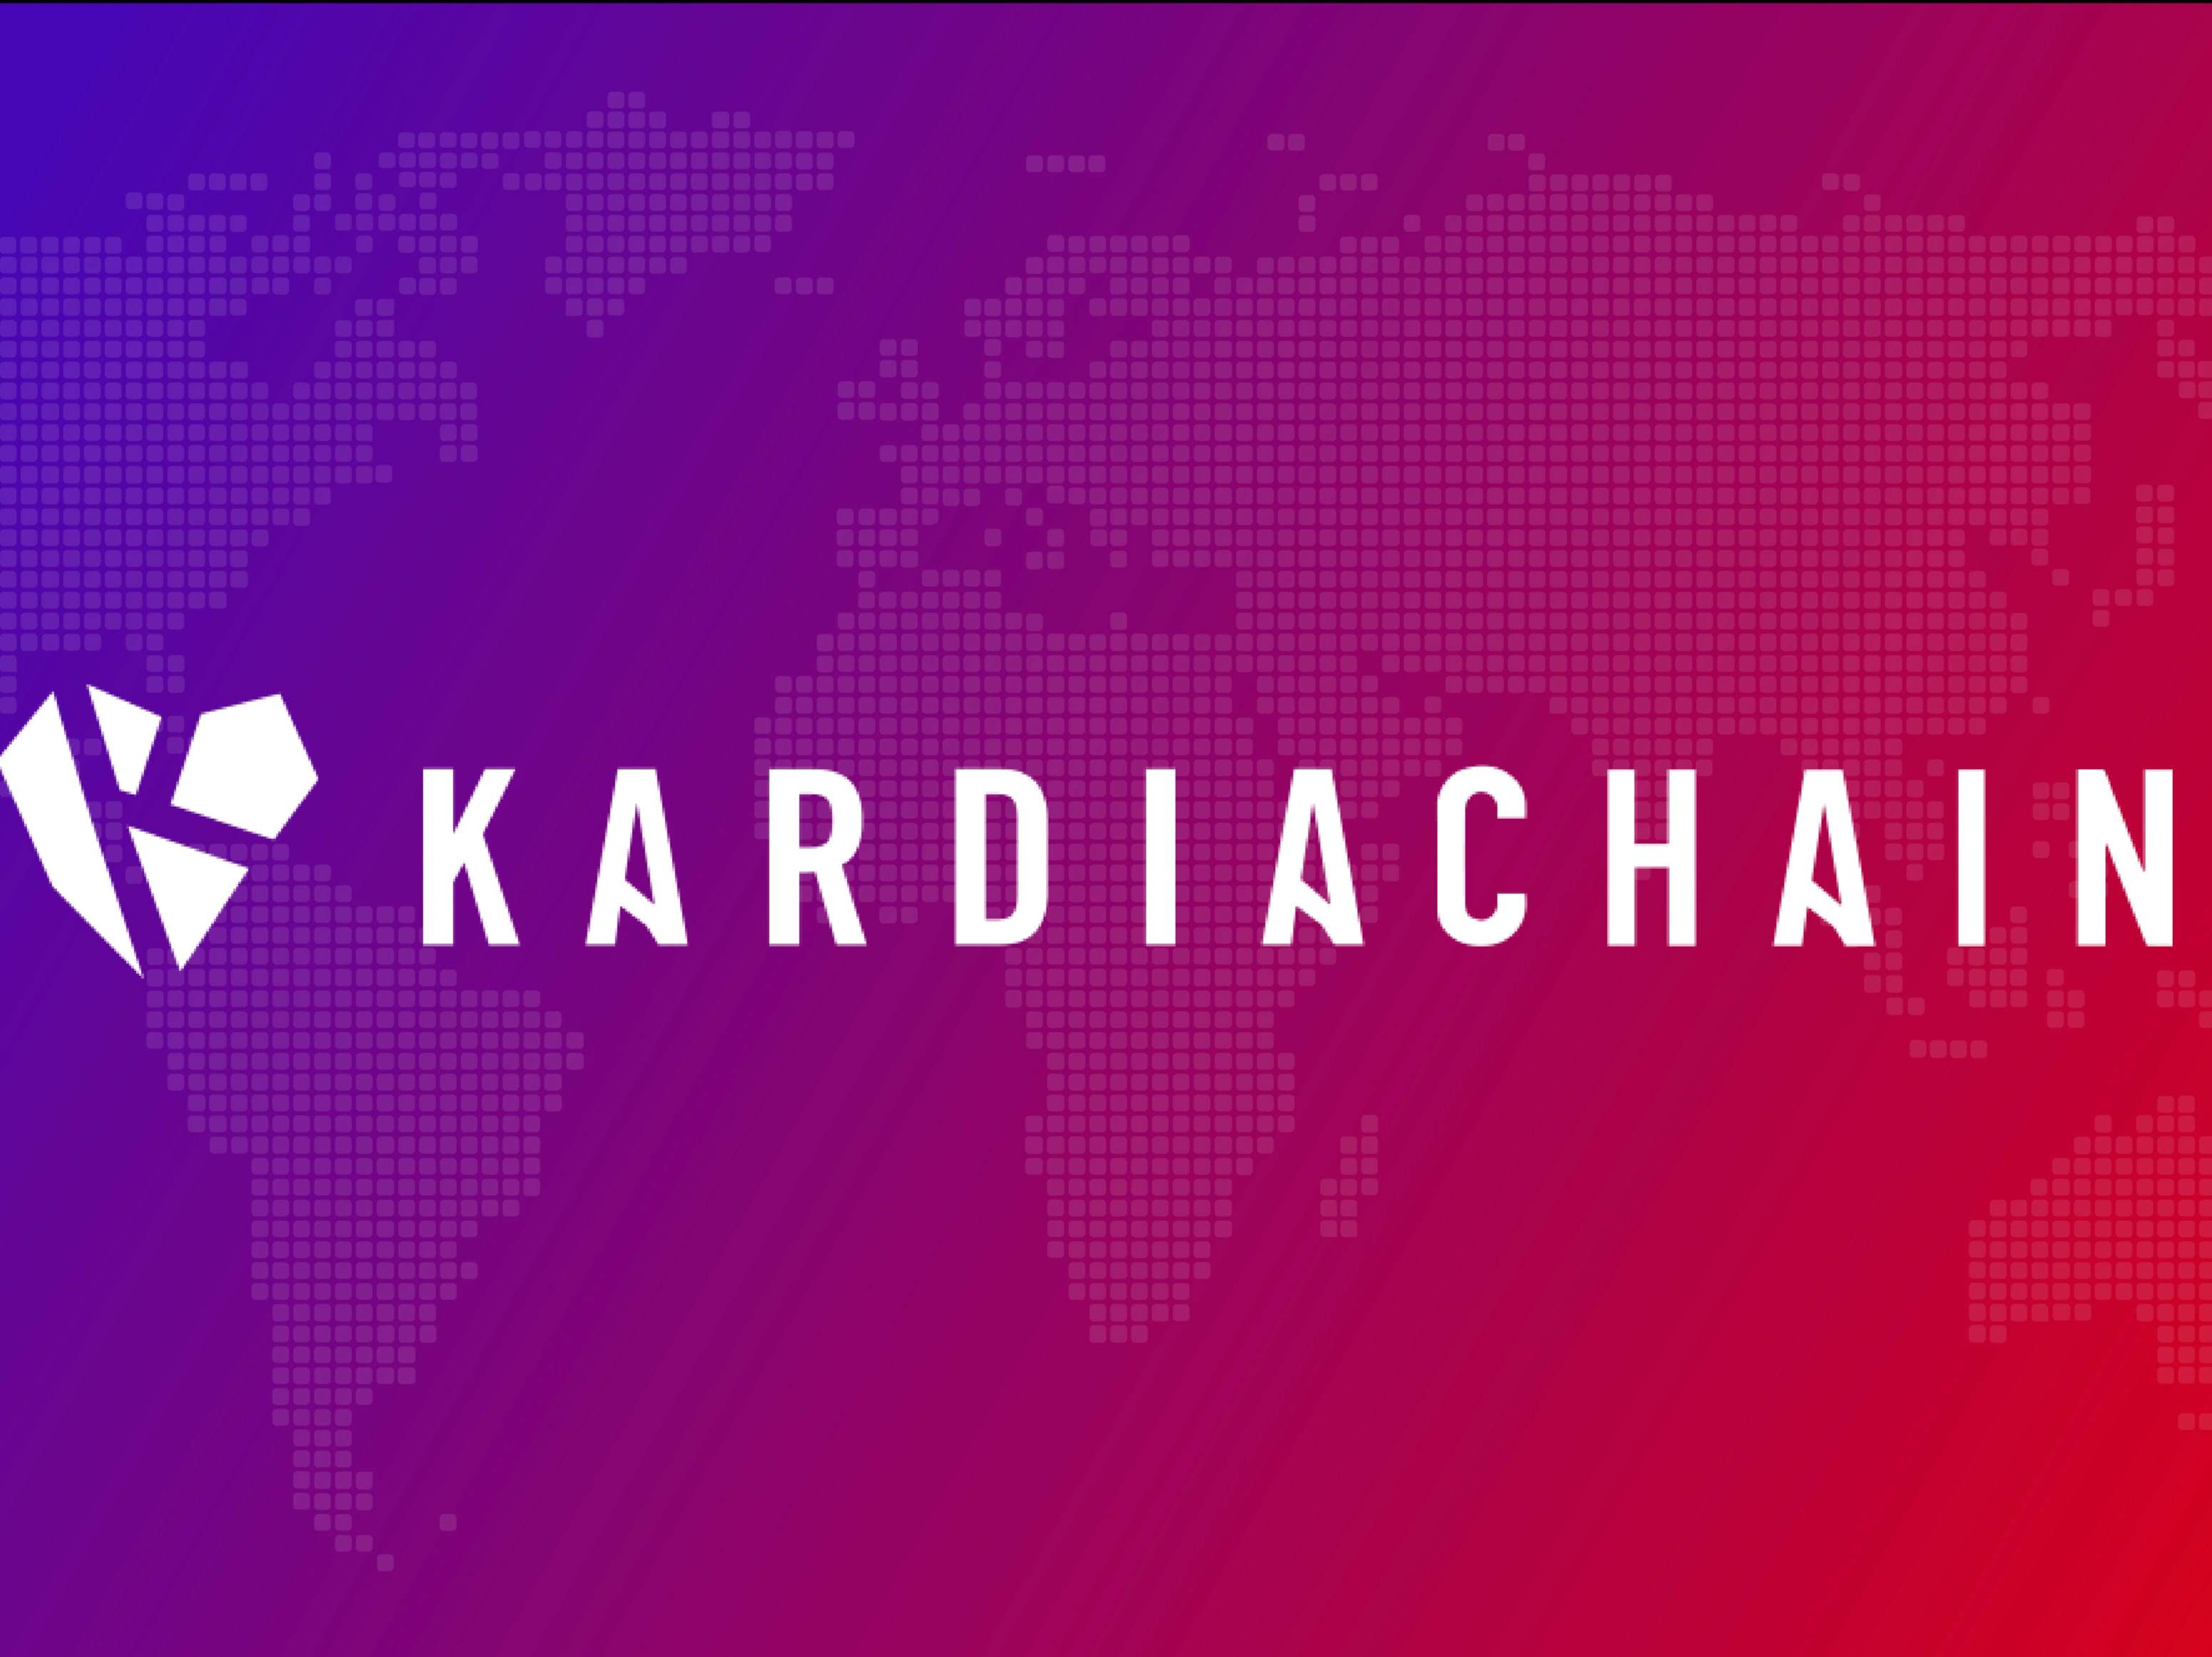 18-captivating-facts-about-kardiachain-kai